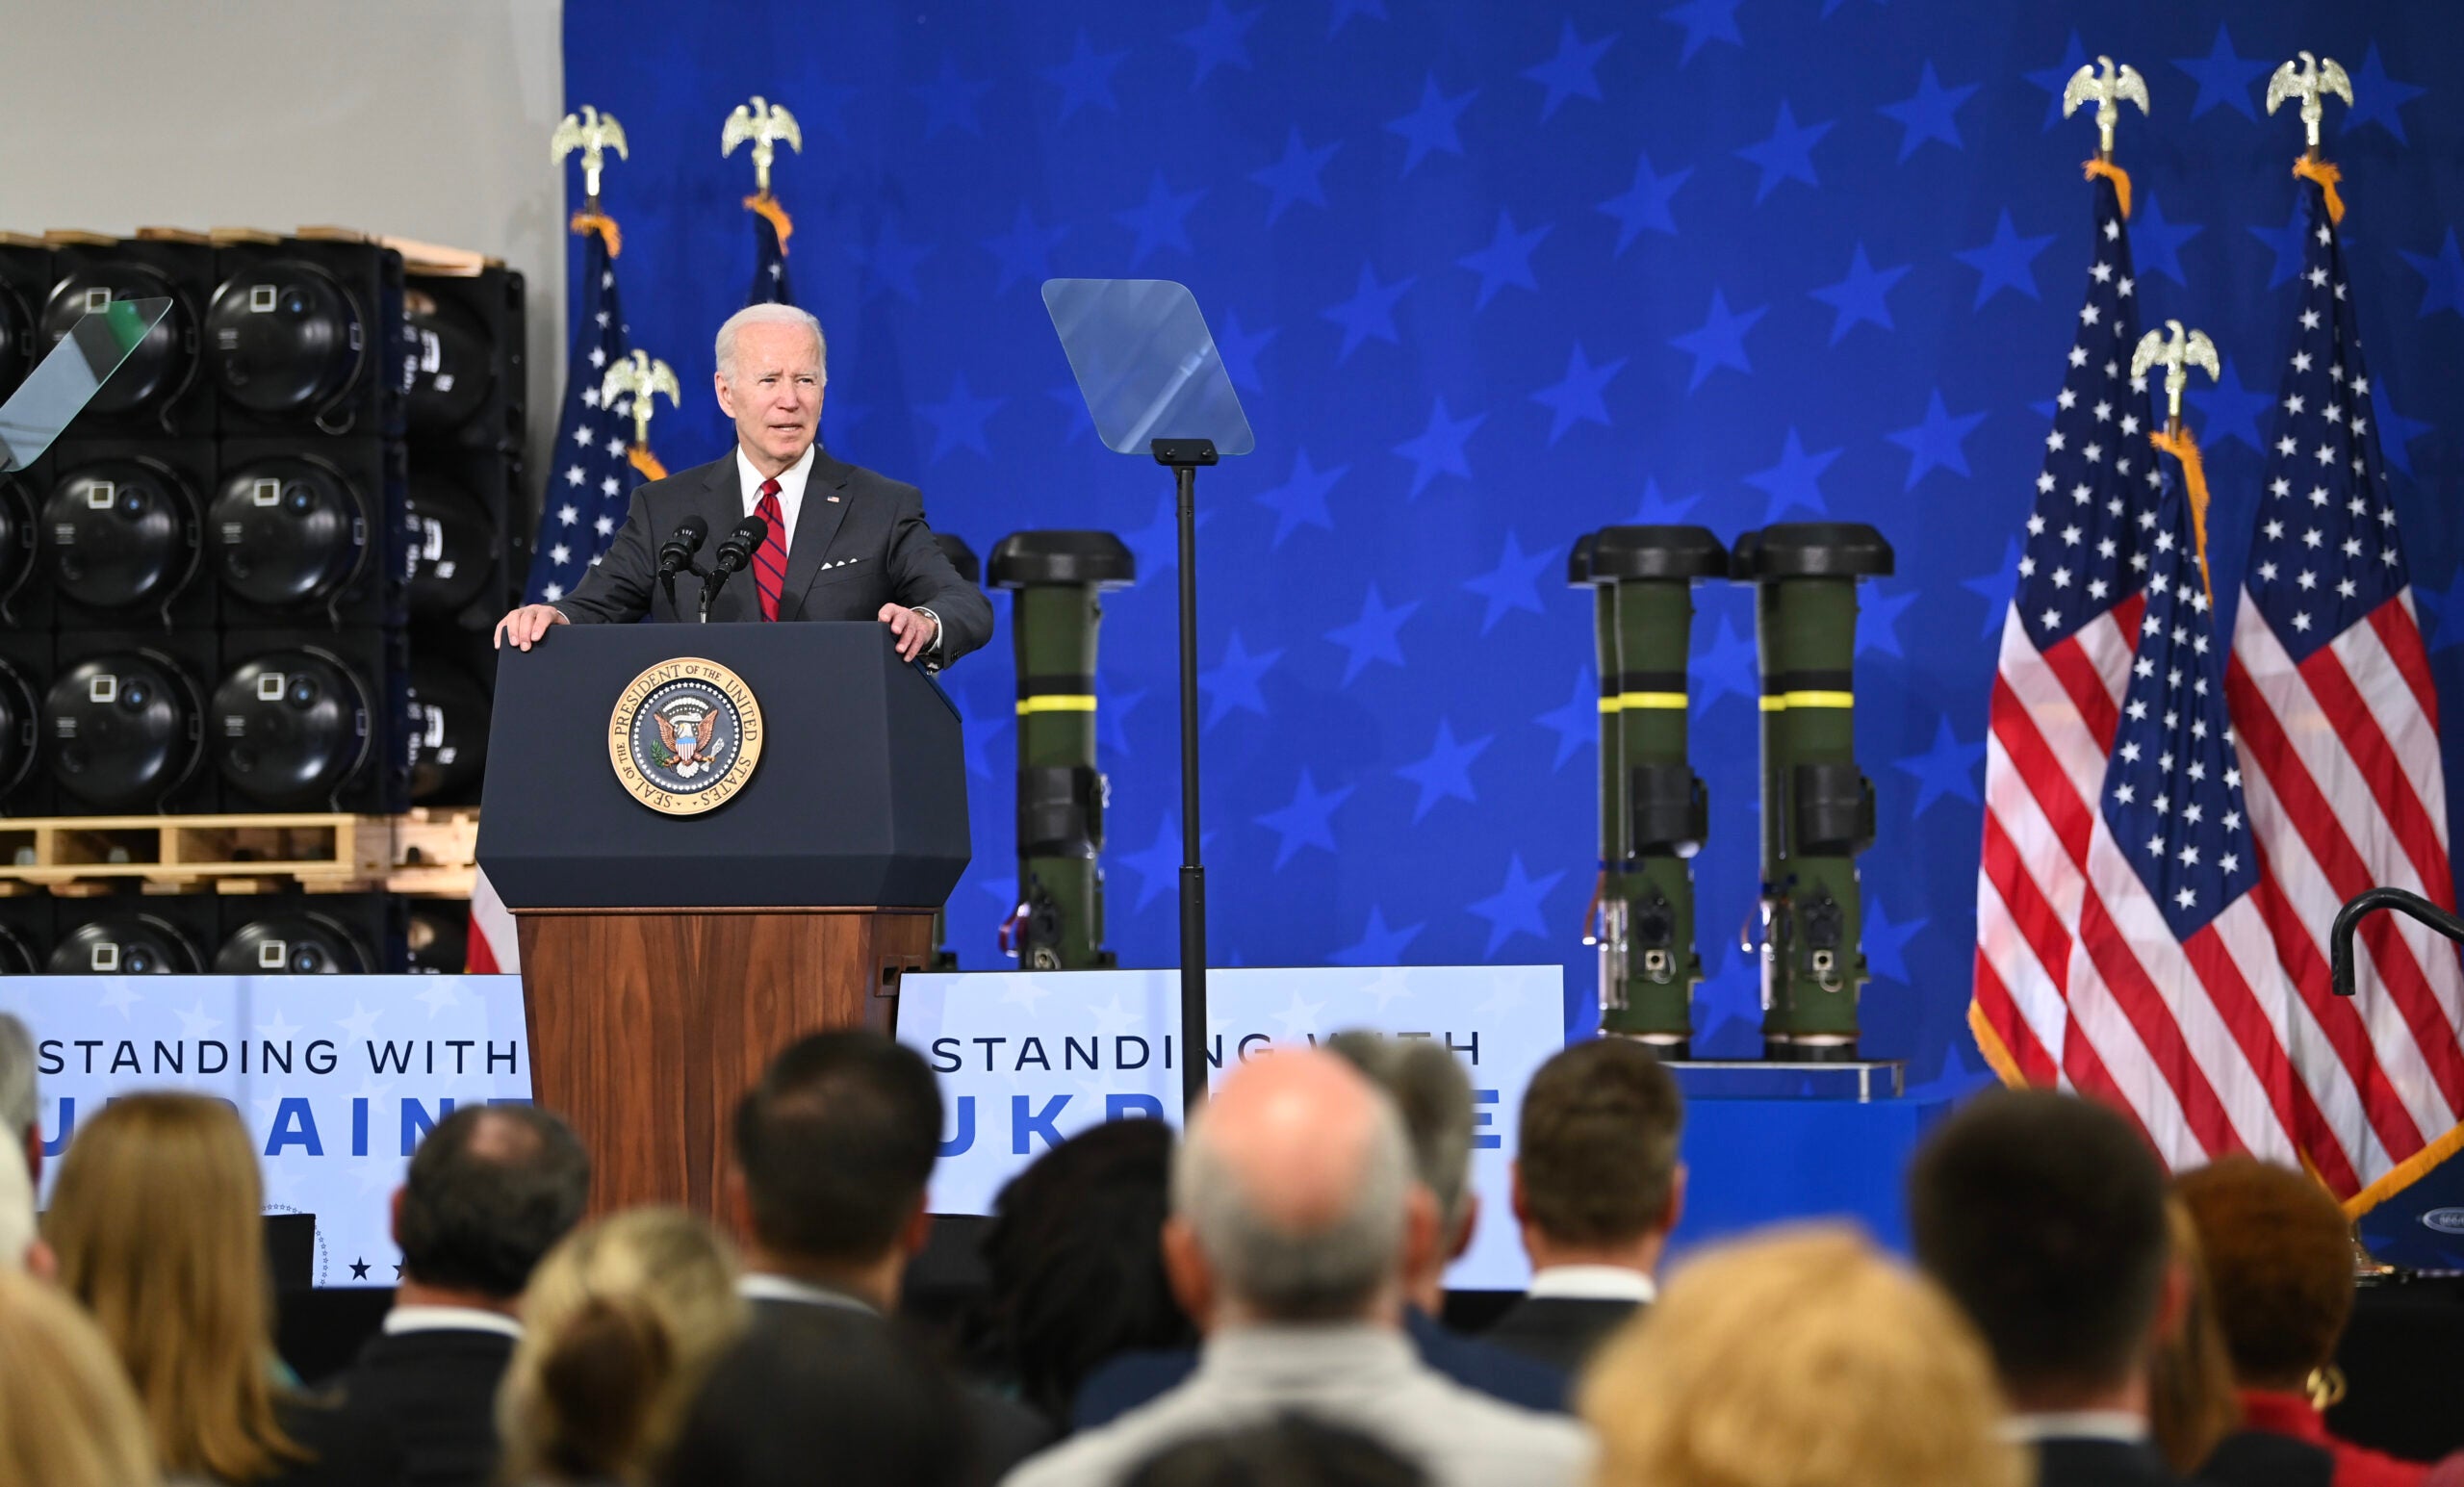 TROY, AL - MAY 03: U.S. President Joe Biden speaks to employees at Lockheed Martin, a facility which manufactures weapon systems such as Javelin anti-tank missiles, on May 3, 2022 in Troy, Alabama. The Biden-Harris Administration is providing these weapons to Ukraine to defend against the Russian invasion. (Photo by Julie Bennett/Getty Images)